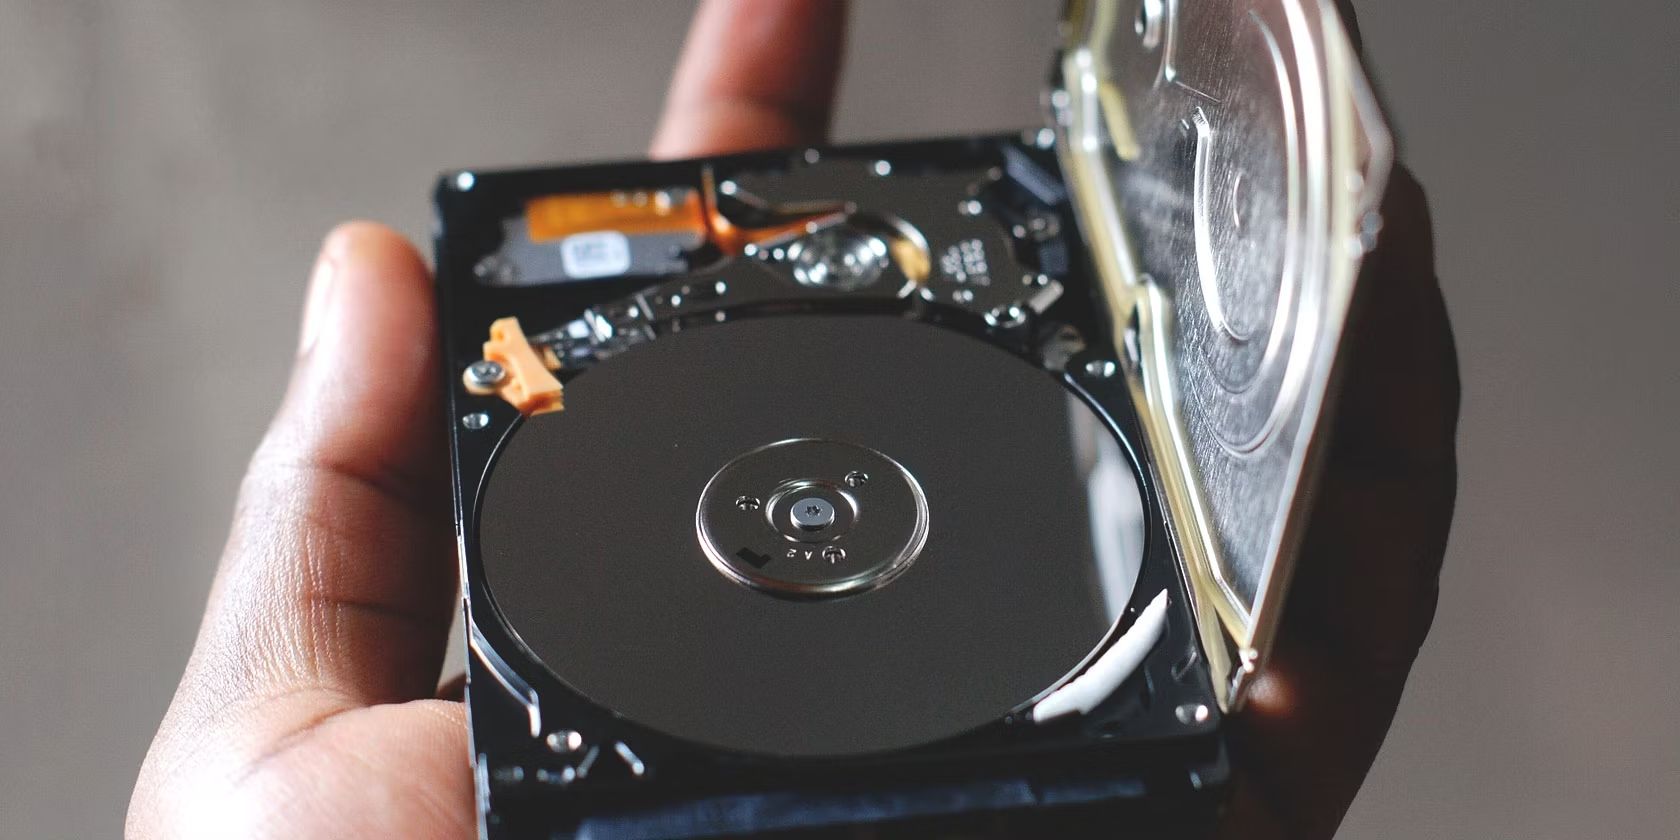 How To Access Hard Disk Drive On Windows 10